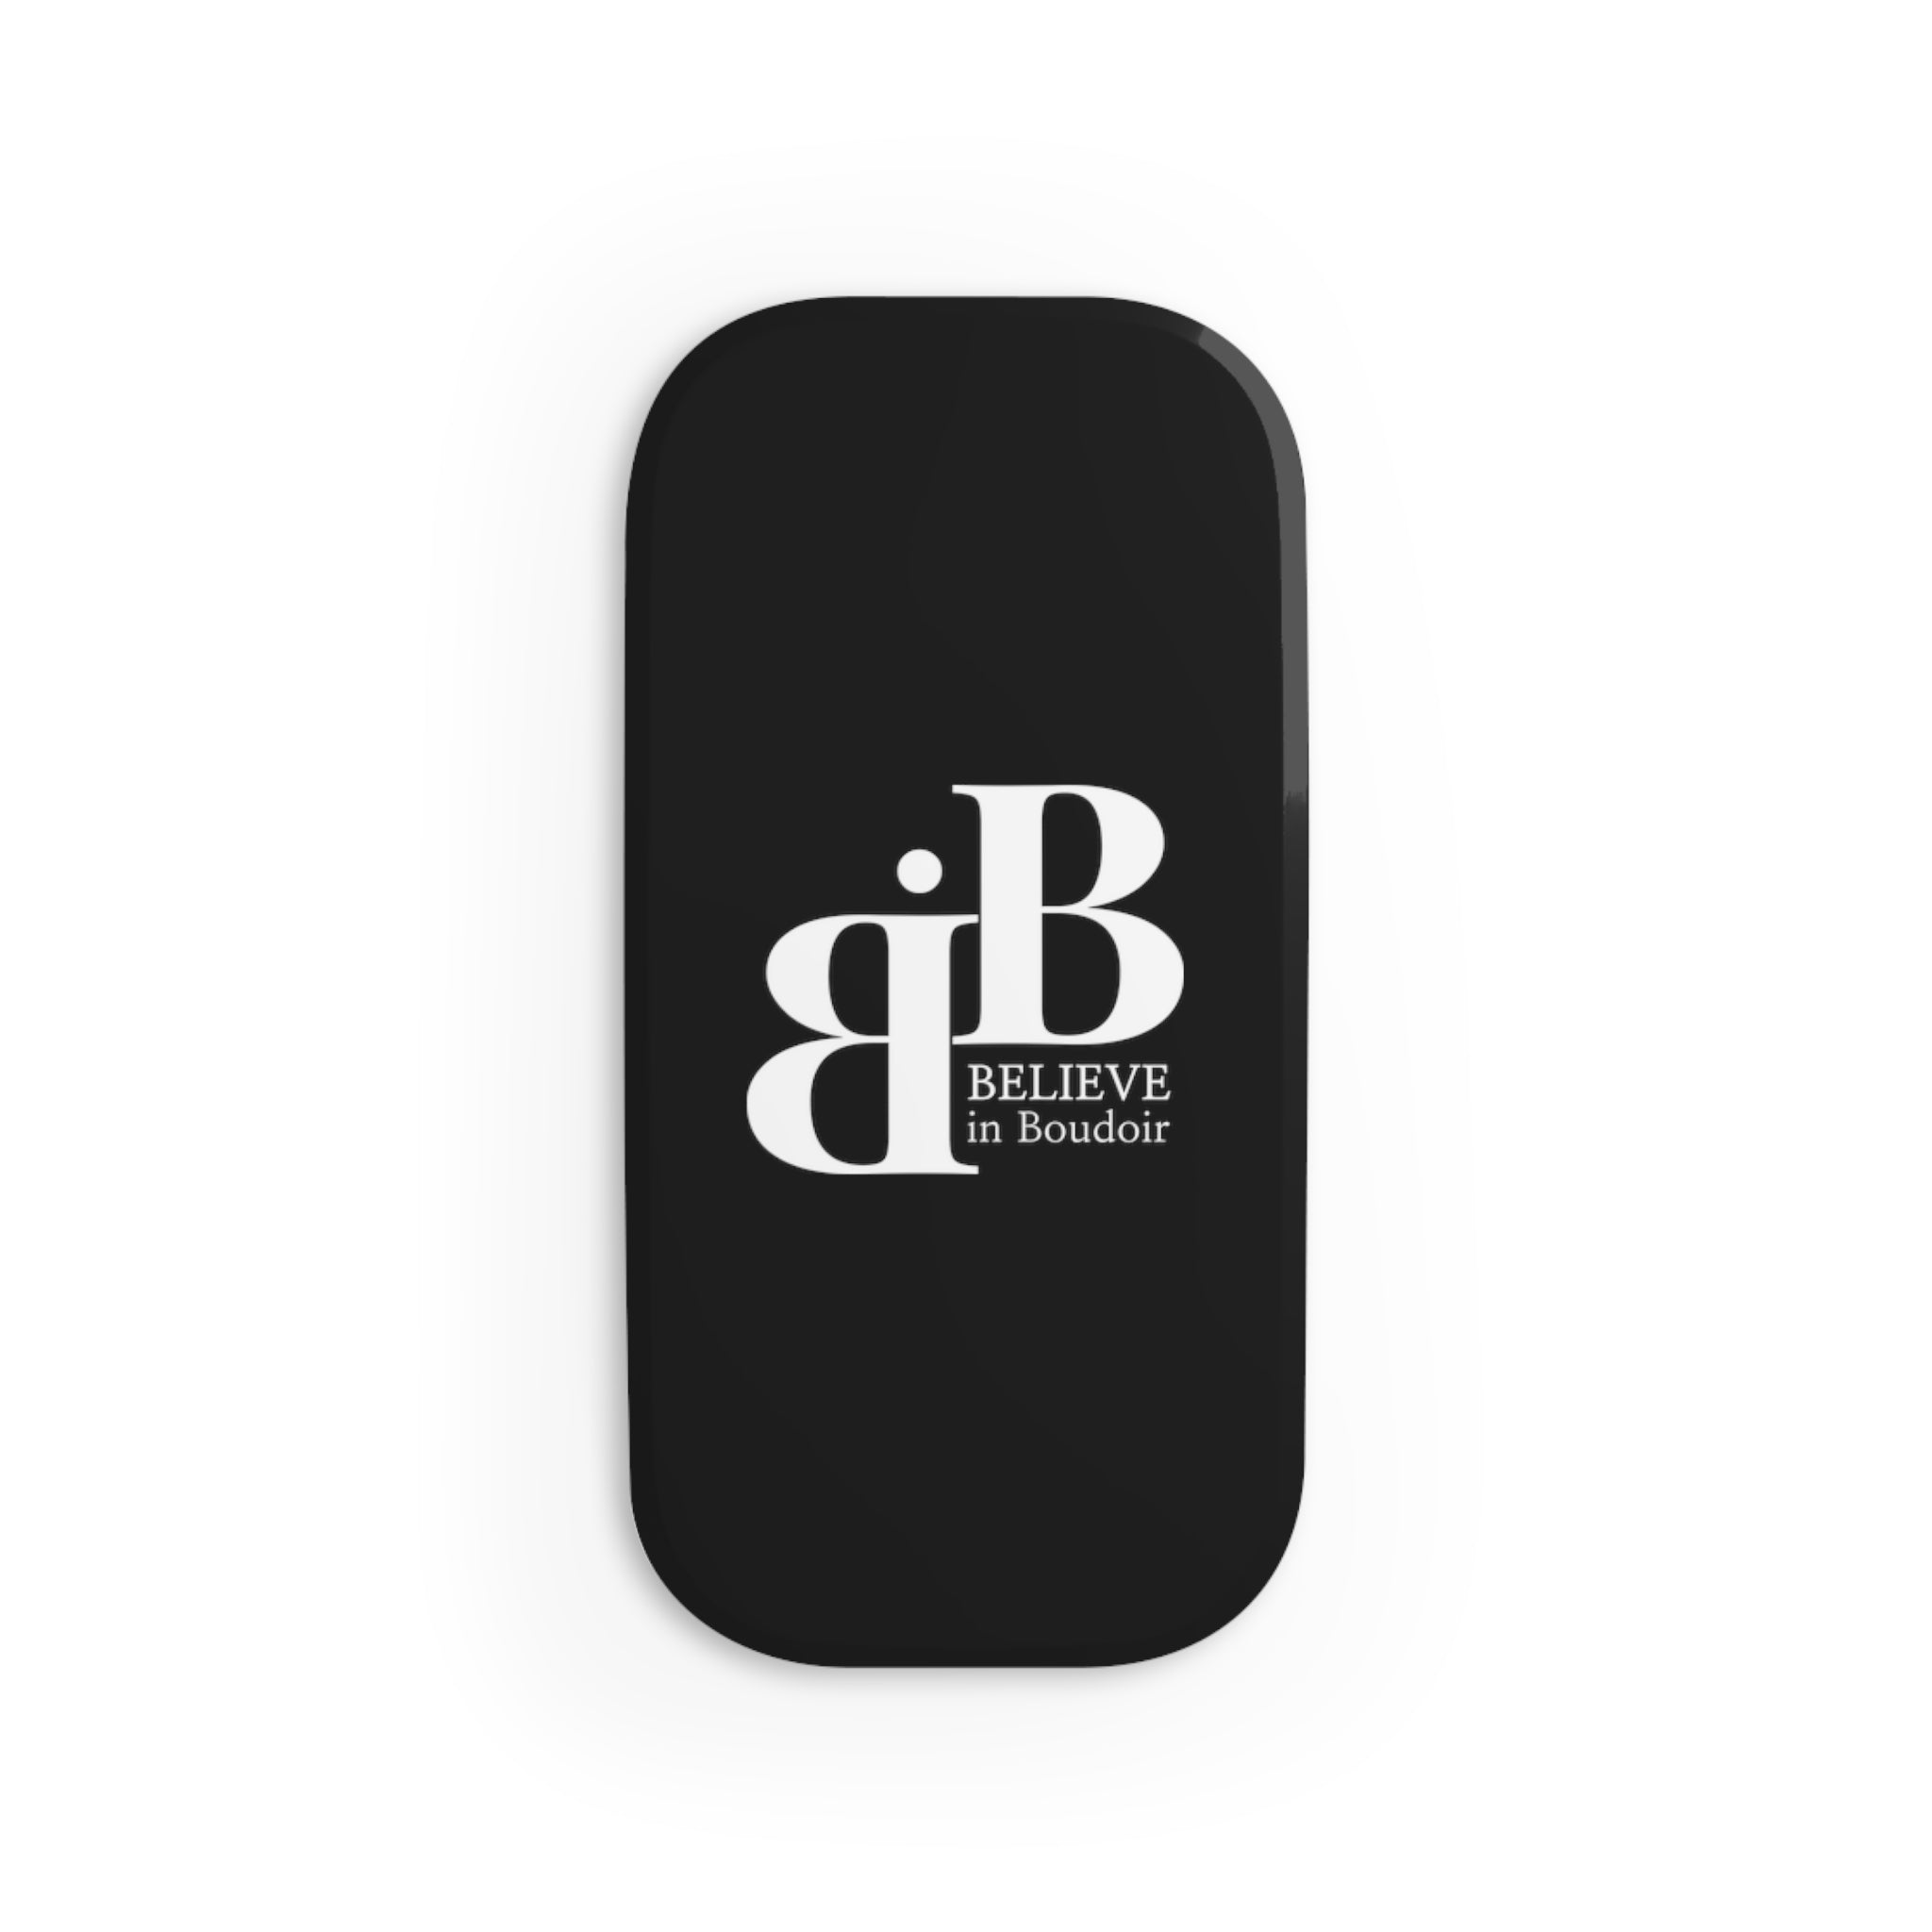 Believe in Boudoir Black Phone Click-On Grip with White Logo